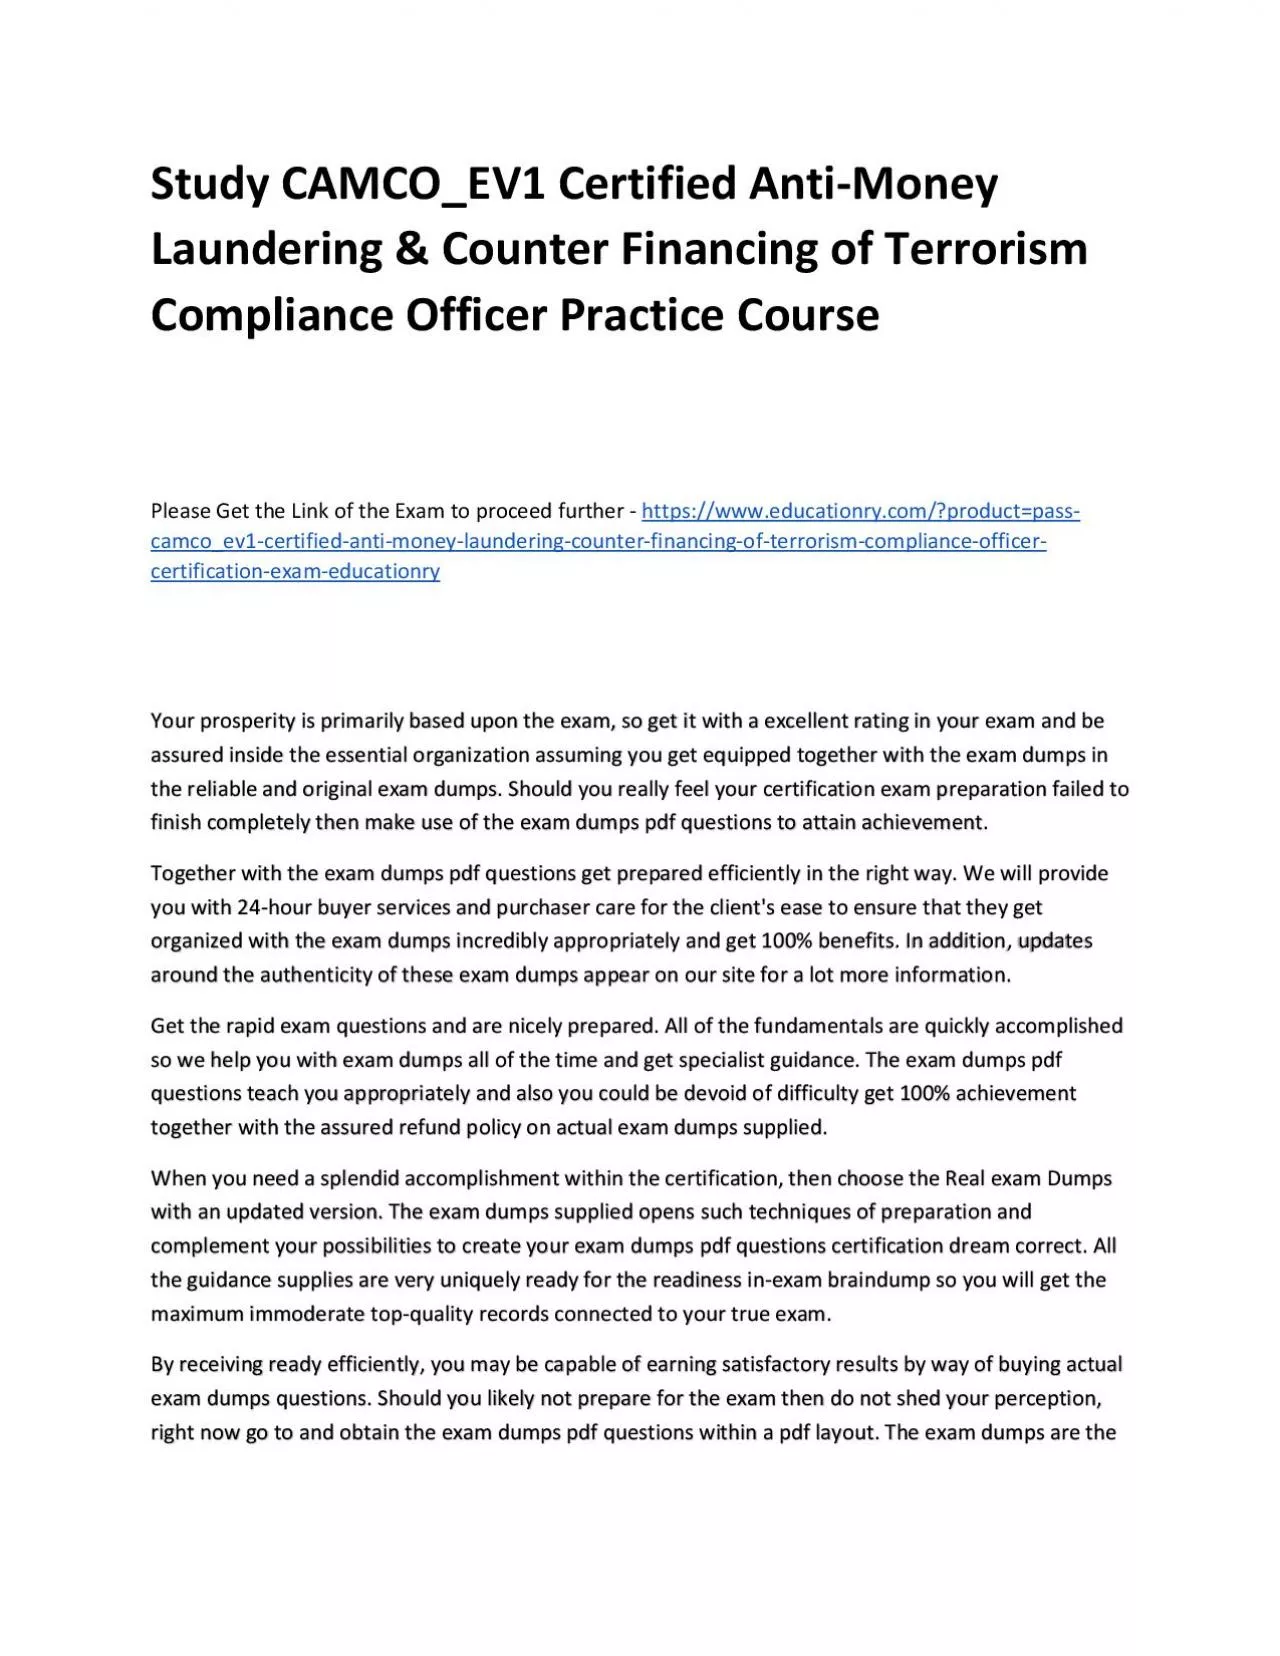 Study CAMCO_EV1 Certified Anti-Money Laundering & Counter Financing of Terrorism Compliance